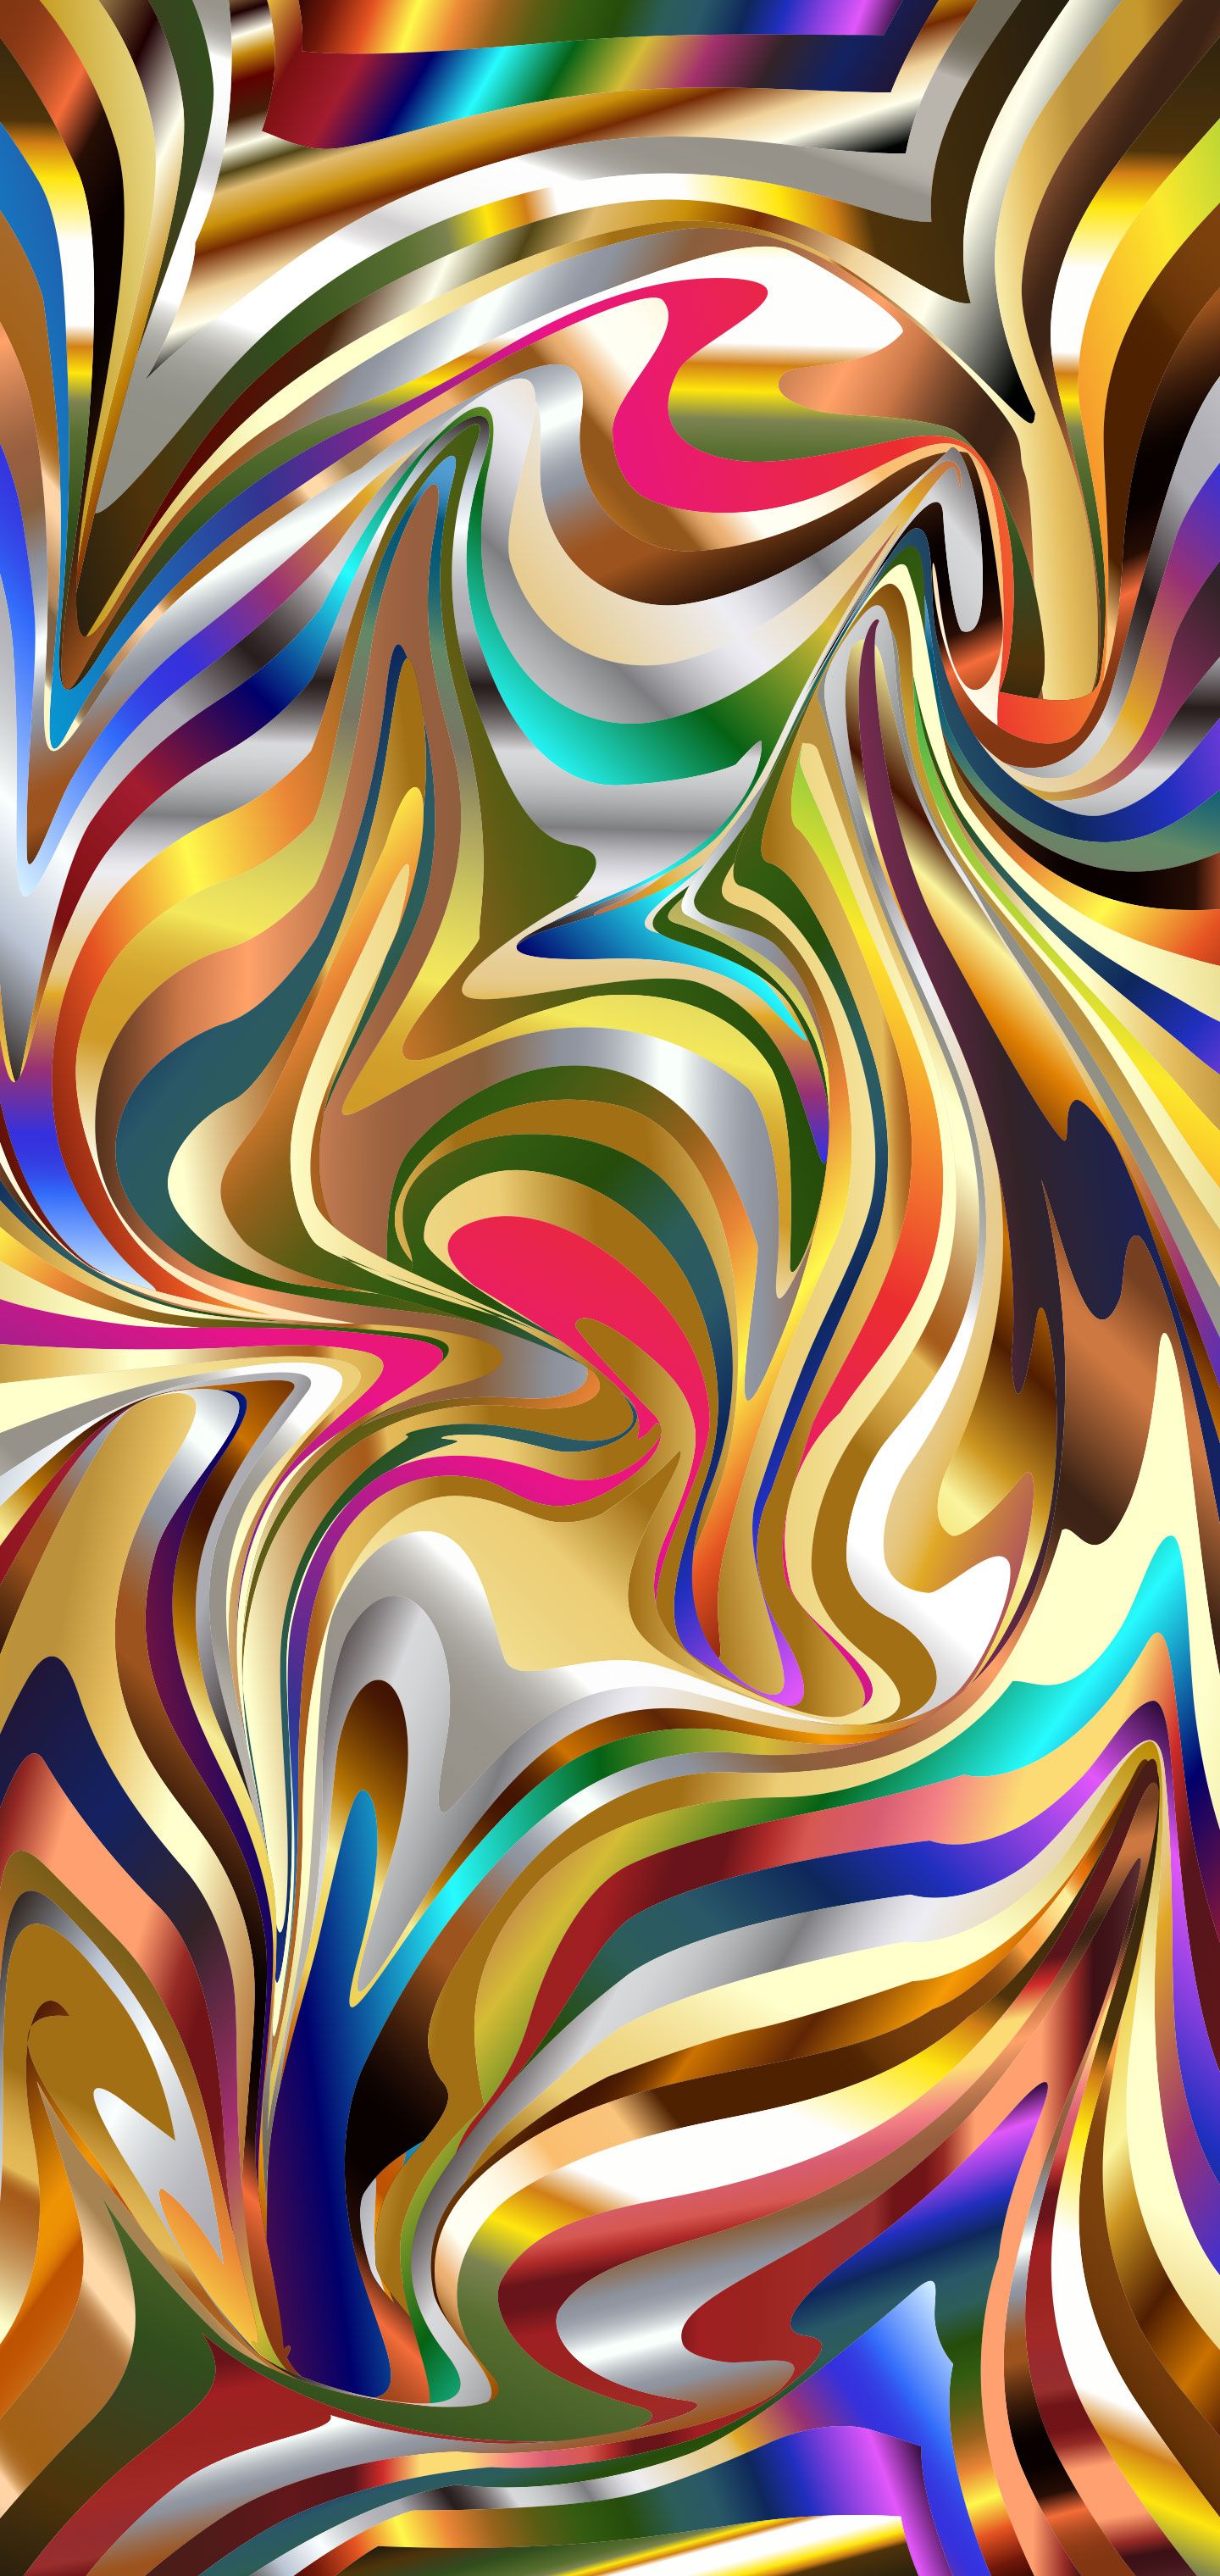 Cool Swirl Colorful ArtWallpapers